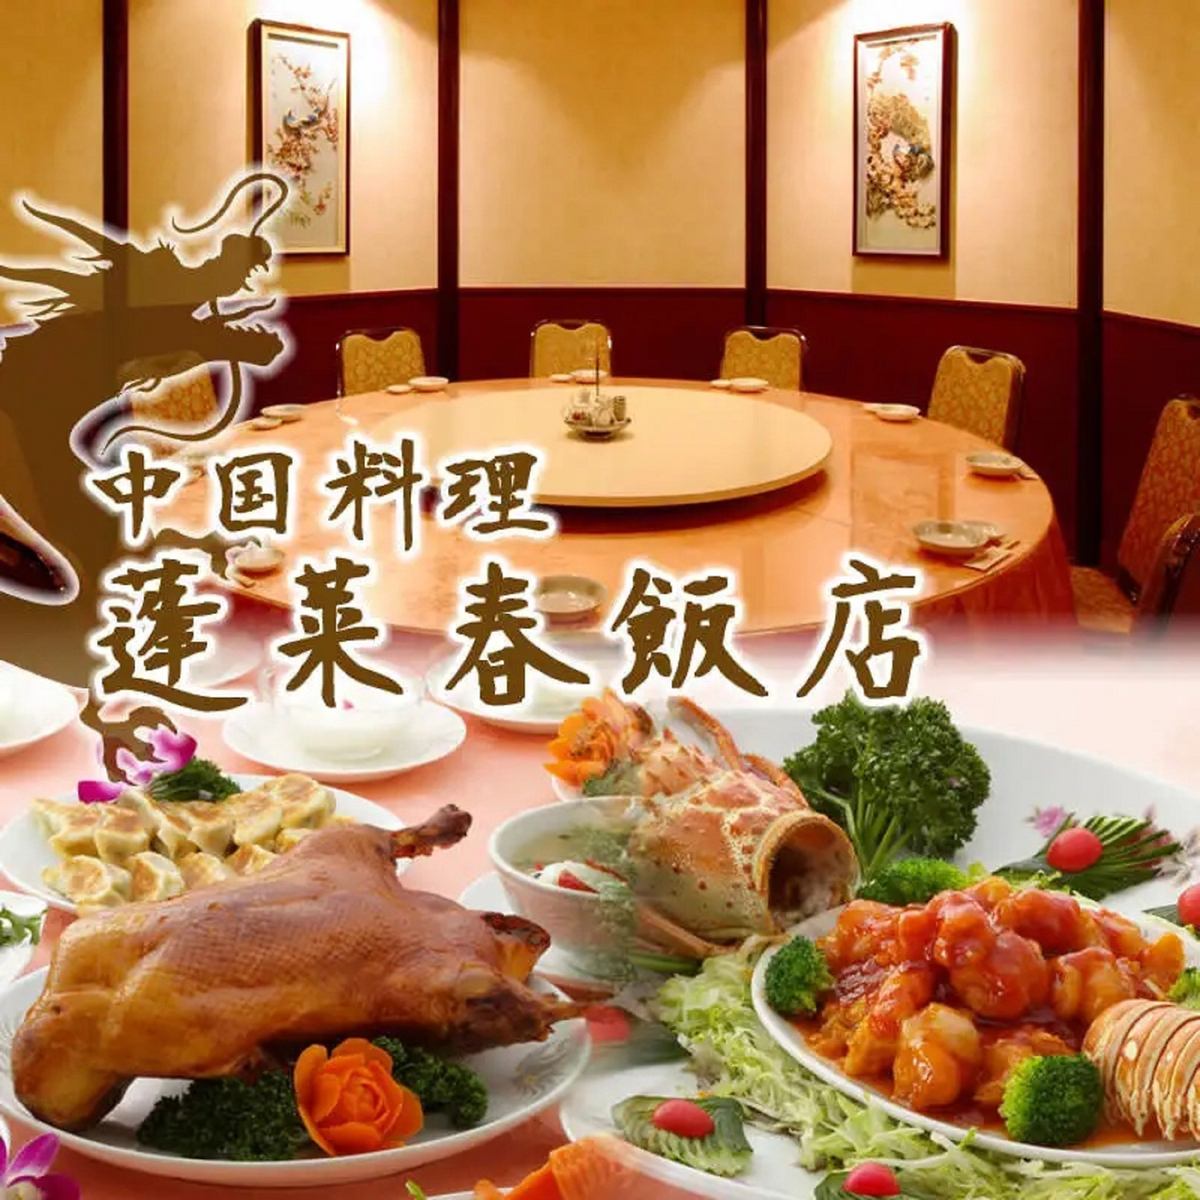 All-you-can-eat Chinese cuisine with a wide variety of course meals and party plans!